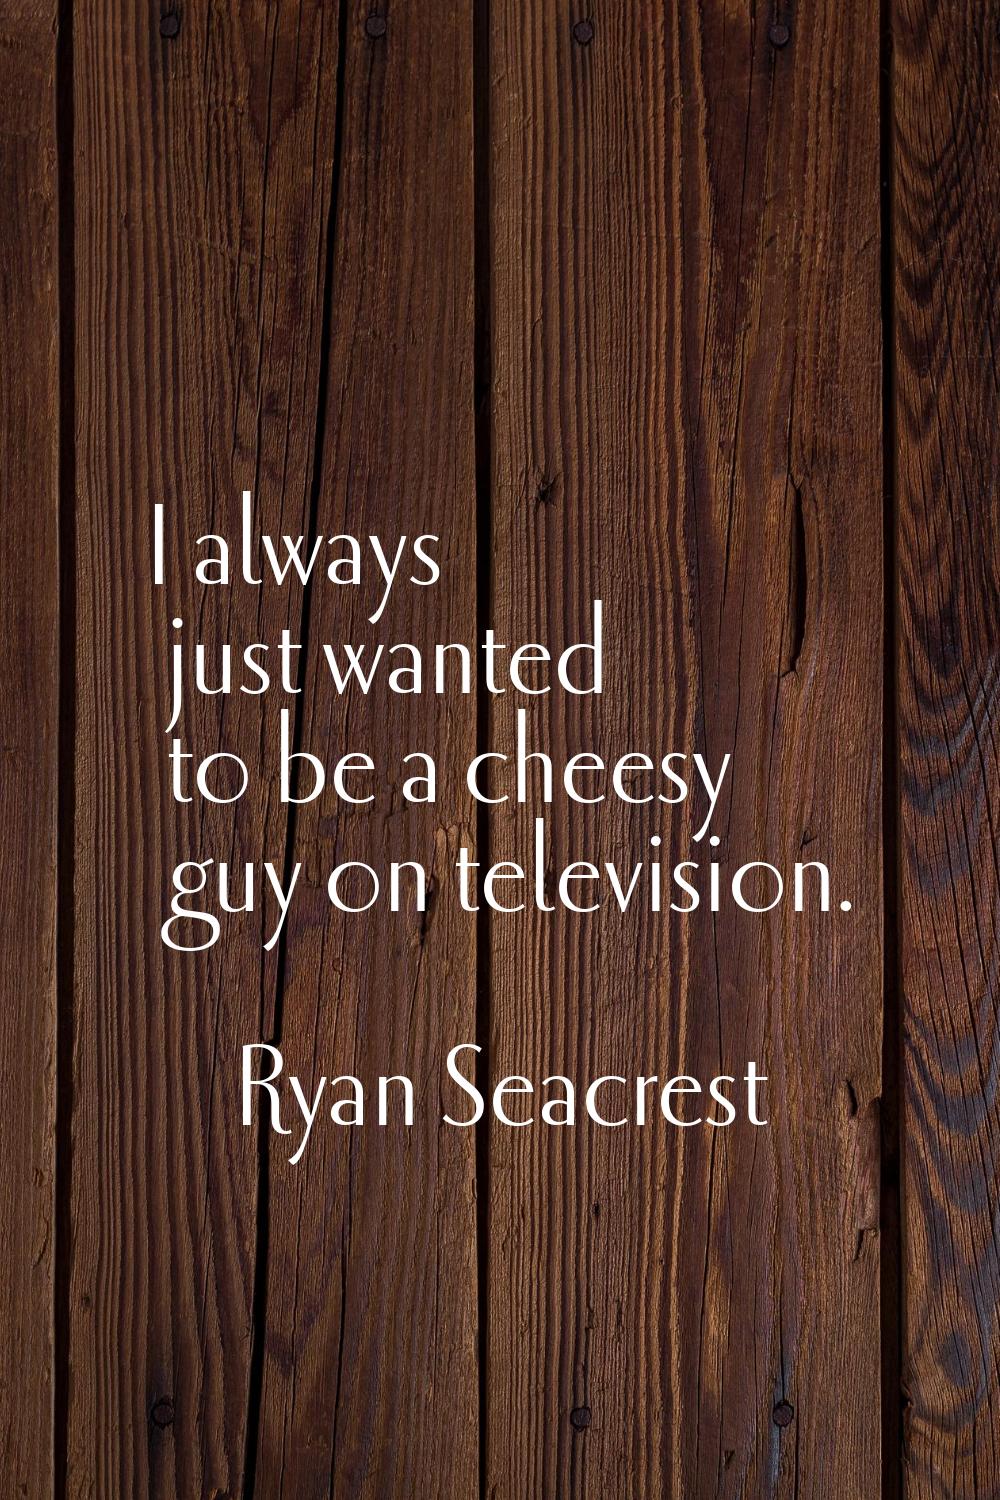 I always just wanted to be a cheesy guy on television.